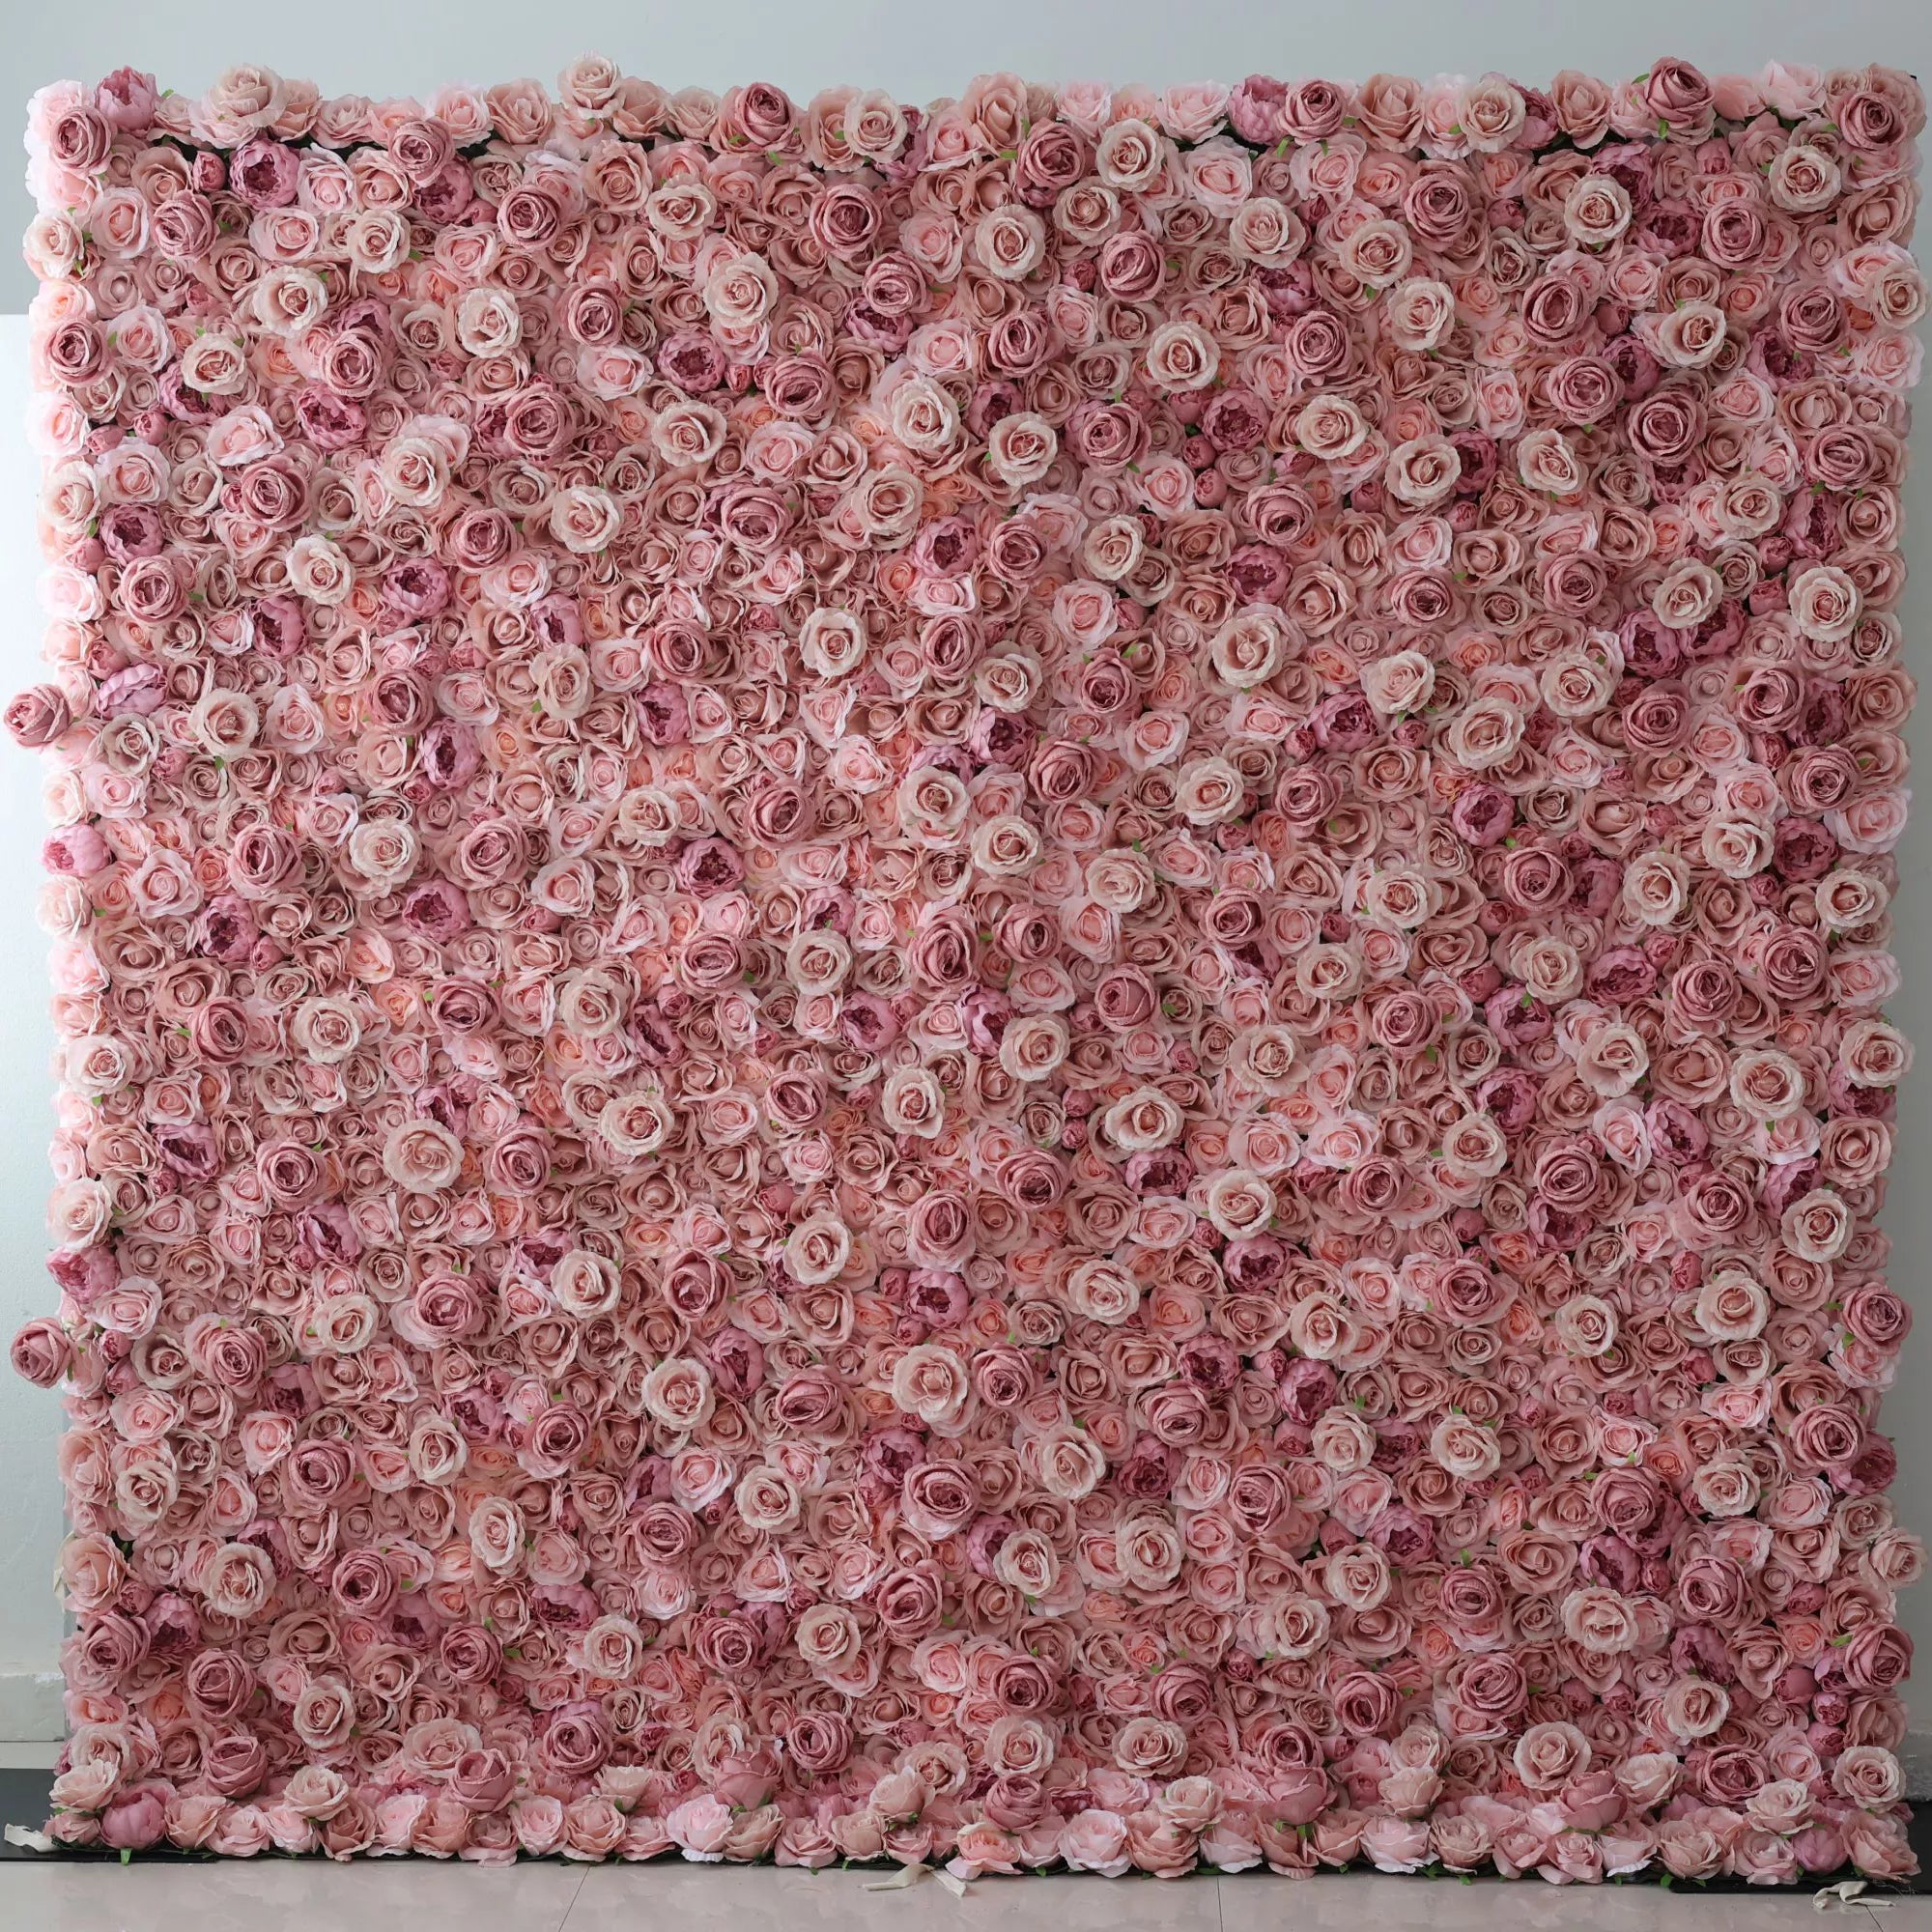 Valar Flower Unveils: Rosé Reverie – An Enchanting Mélange of Dusky Pink & Delicate Cream Fabric Roses – Ideal Floral Mural for Sophisticated Soirees, Bridal Showers & Luxe Home Accents-VF-221